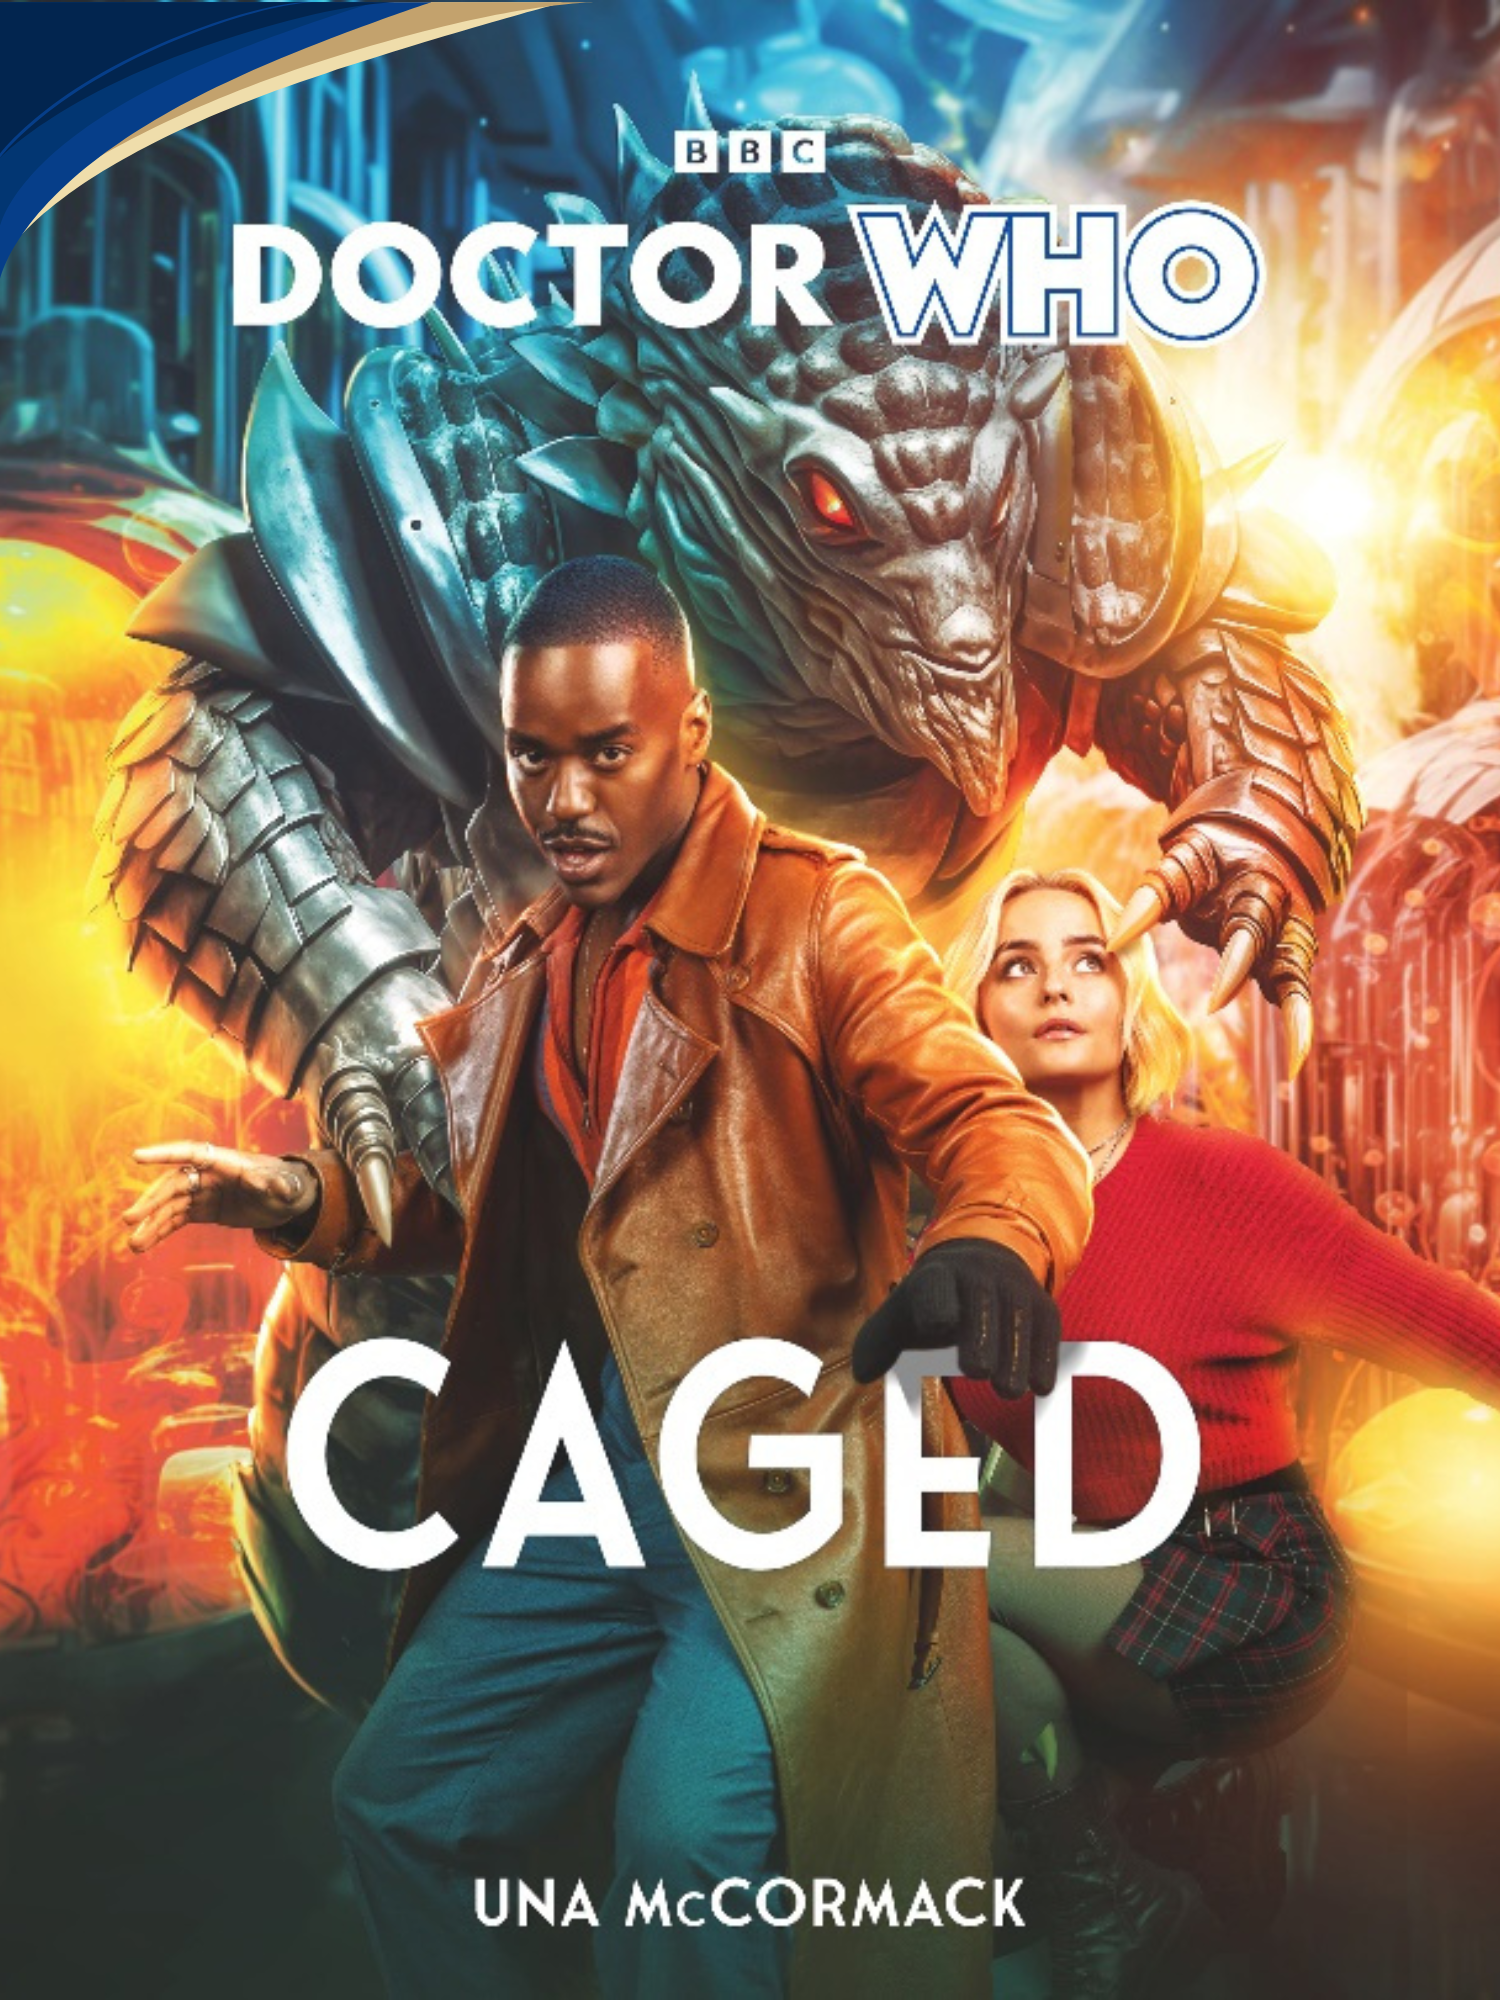 Doctor Who: Caged, by Una McCormack (book)